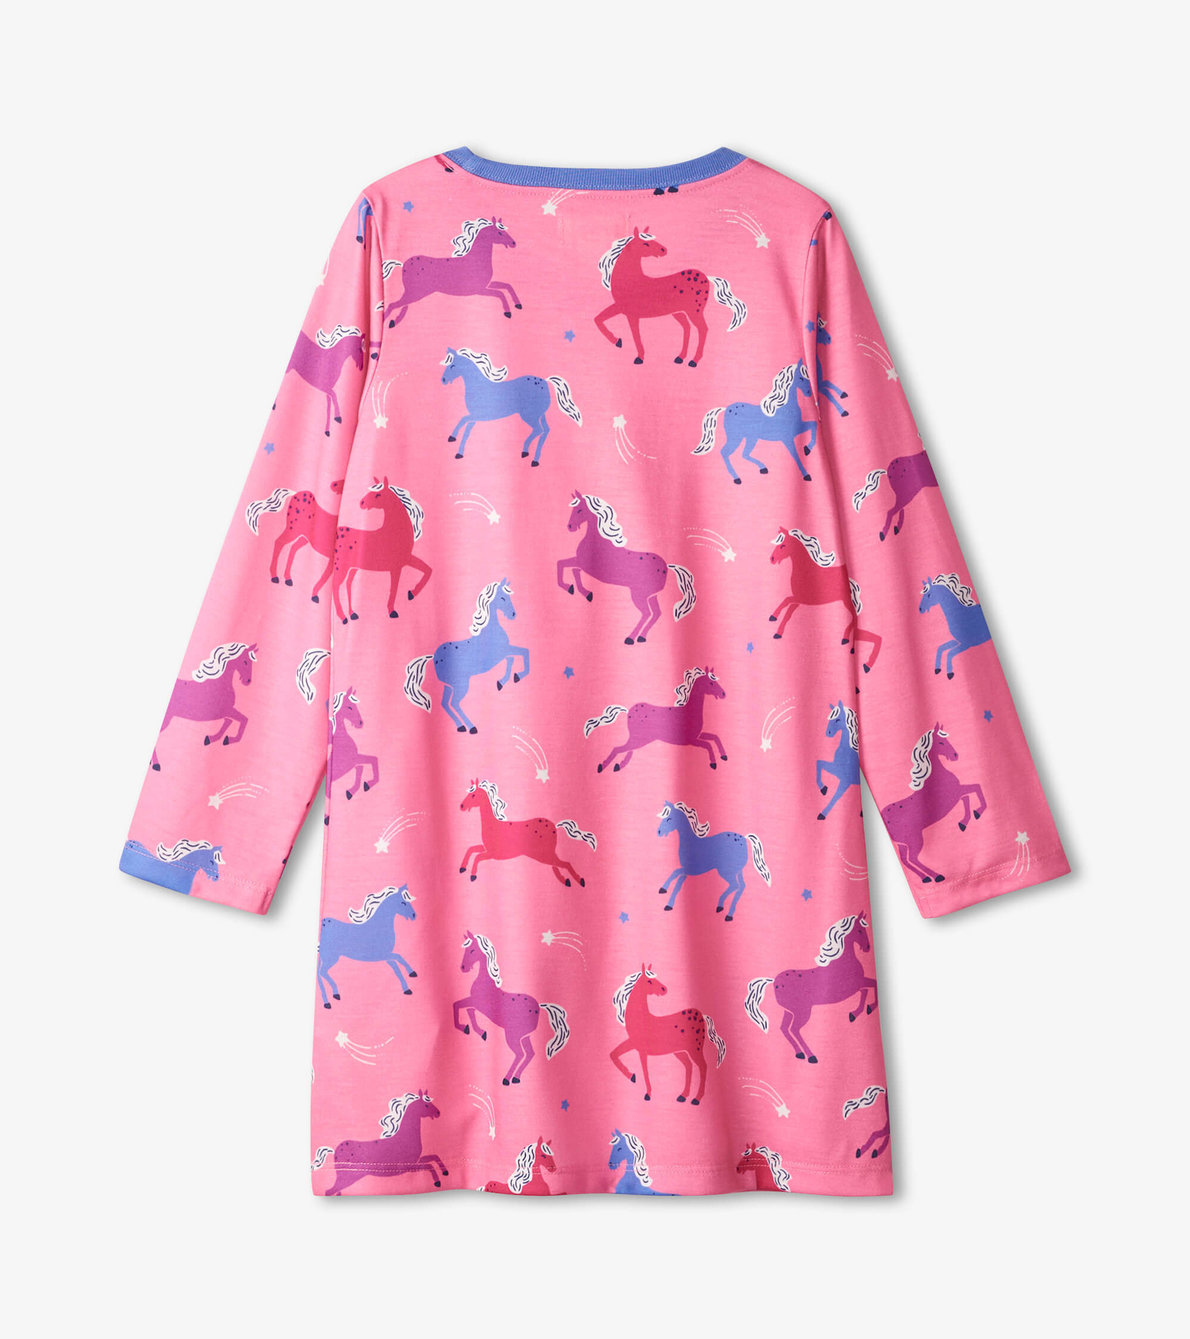 View larger image of Dreamy Horses Long Sleeve Nightdress